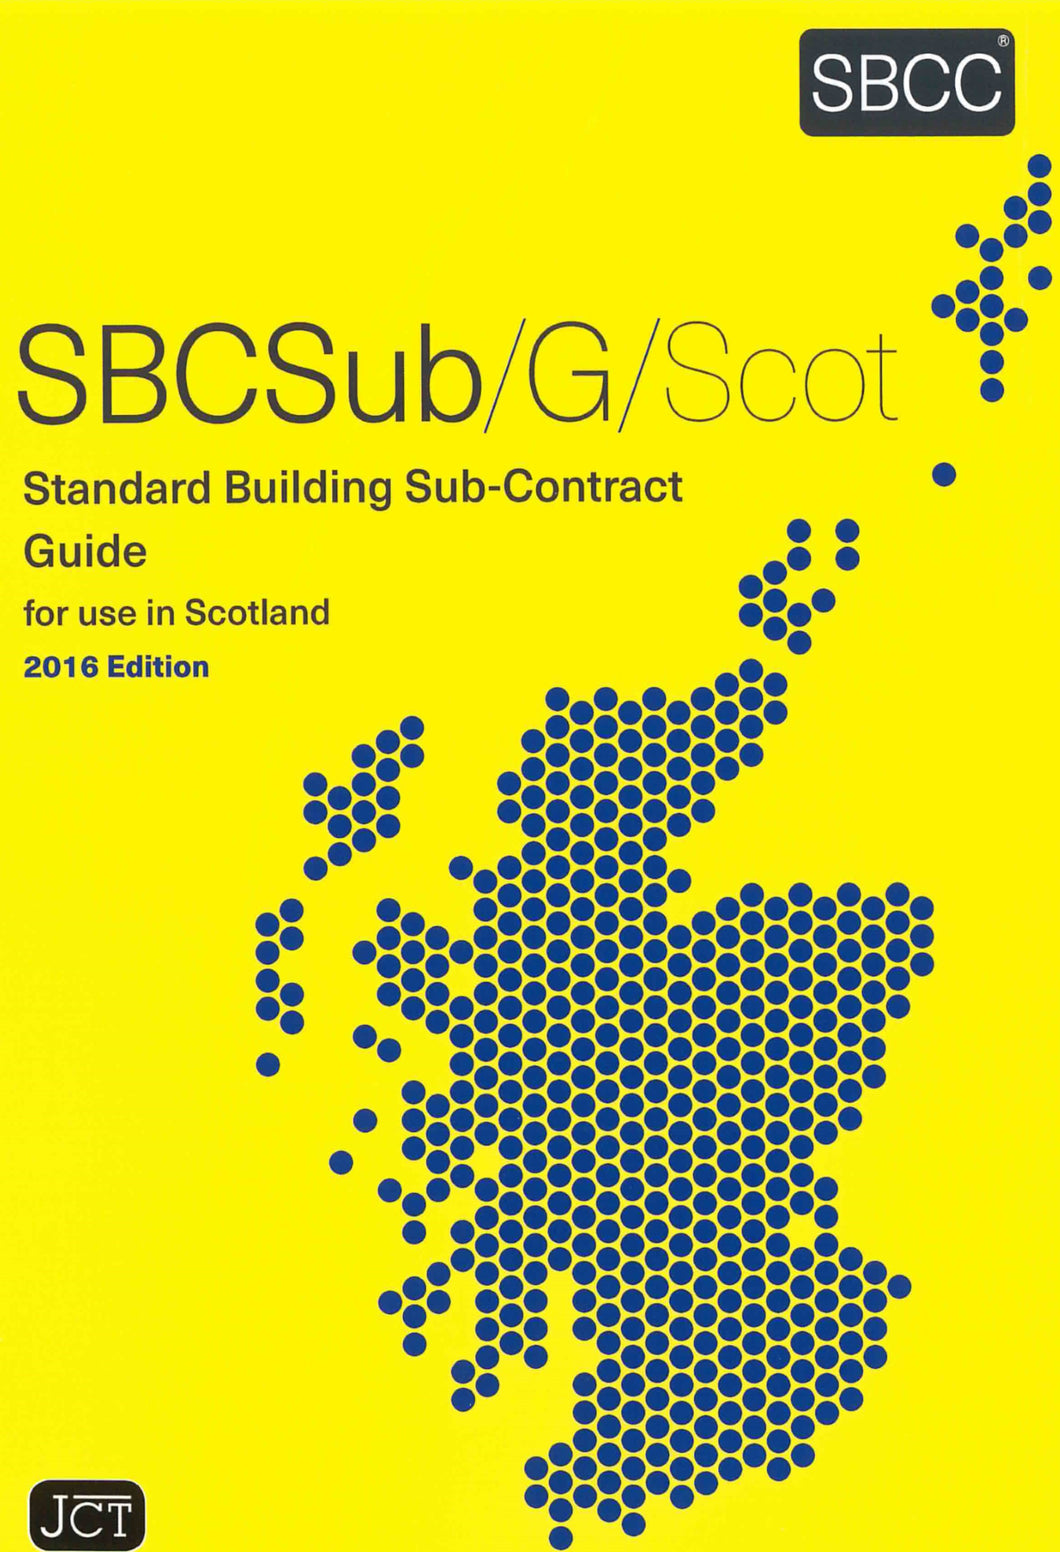 Standard Building Sub-Contract Guide for use in Scotland 2016